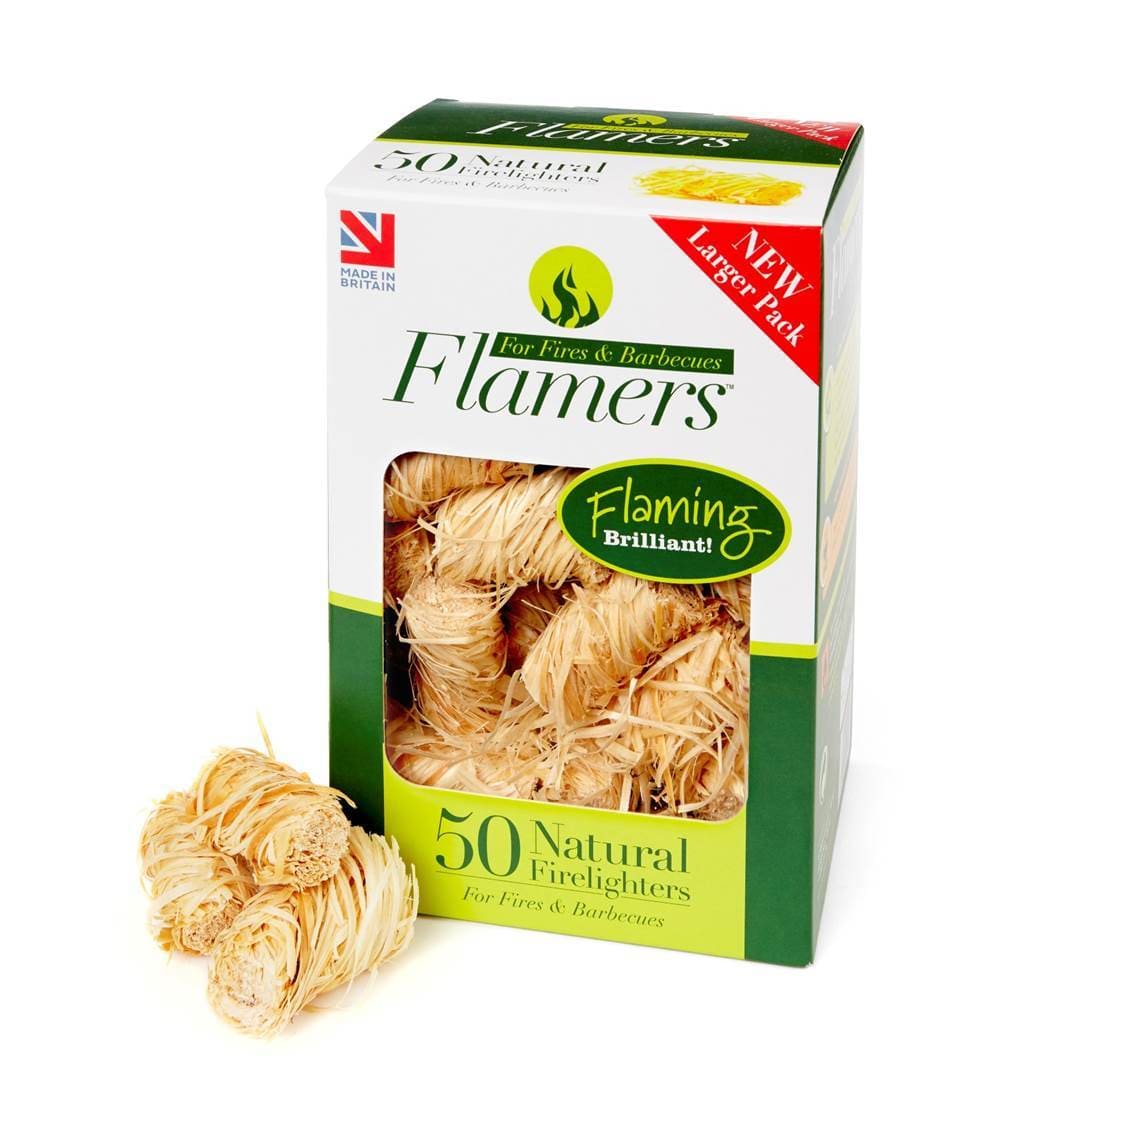 Flamers Natural Firelighters 50 Pack